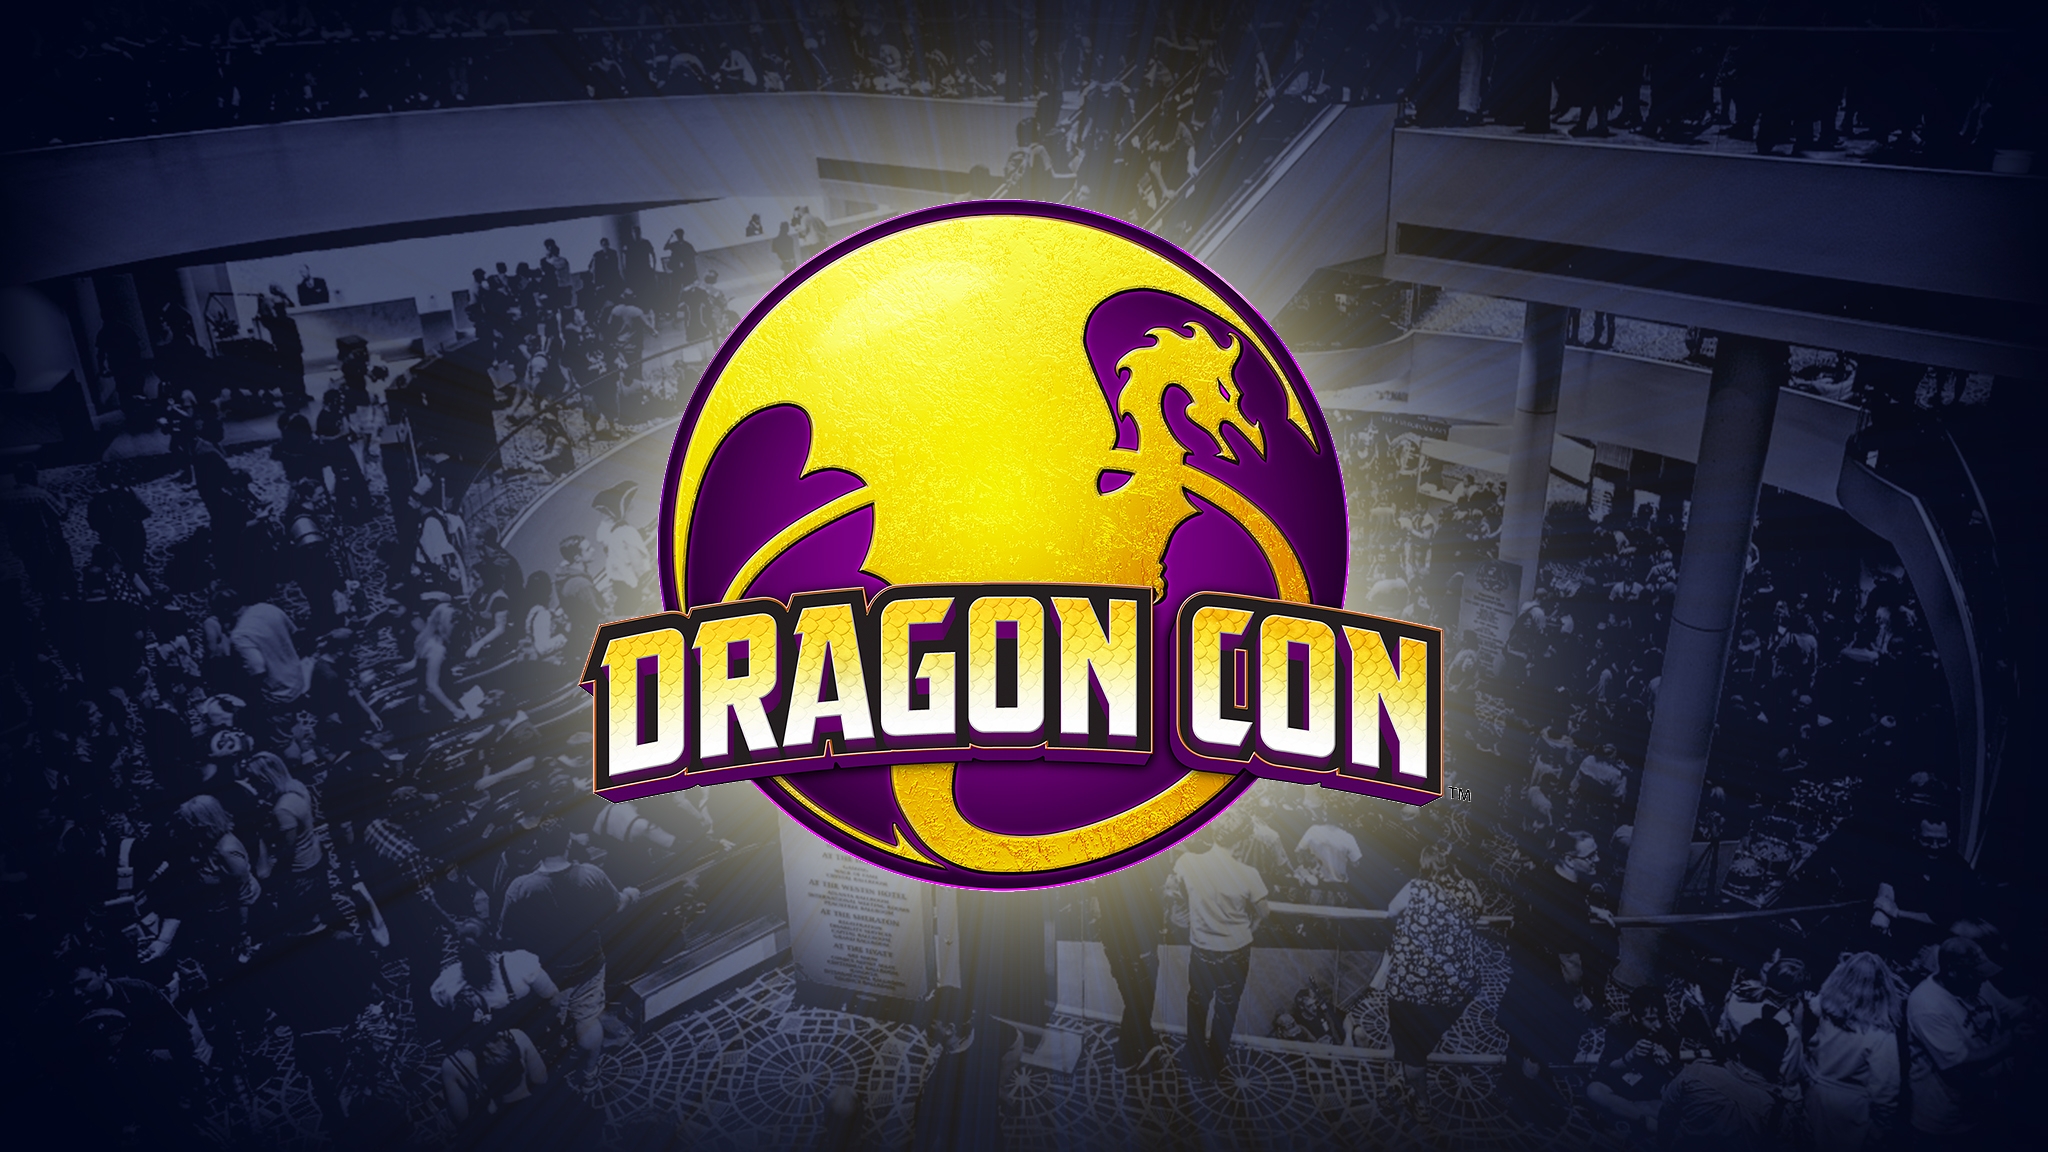 Part 1 of DragonCon Media Coverage (WrittenSins/Indie Advocates) from the JEDI Mom